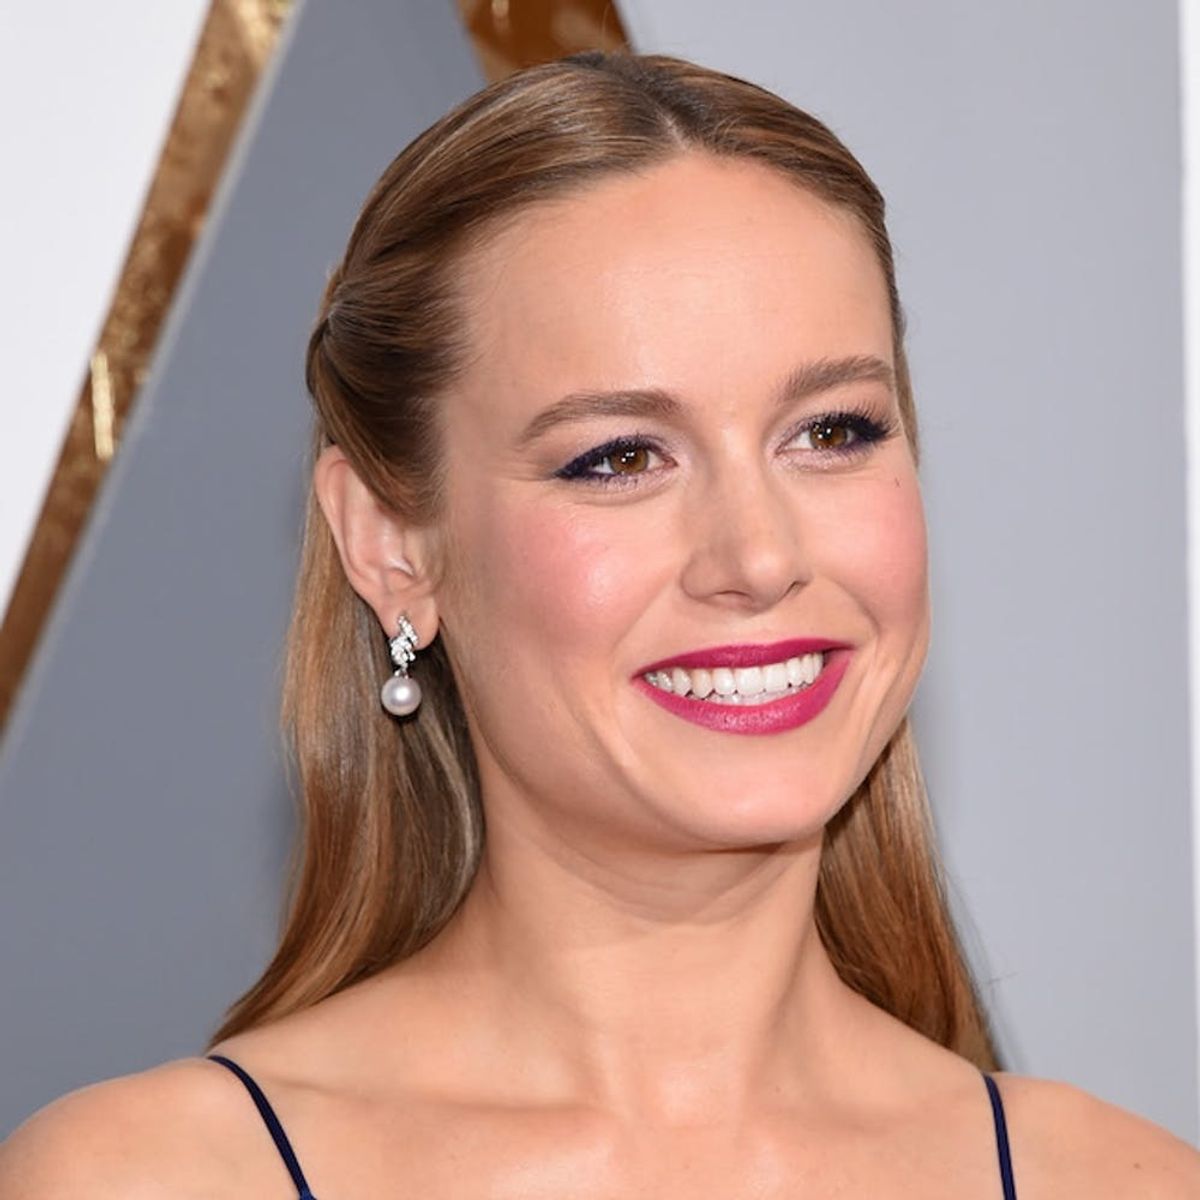 Brie Larson’s Cool Girl Look Will Be Your New Fall Go-To